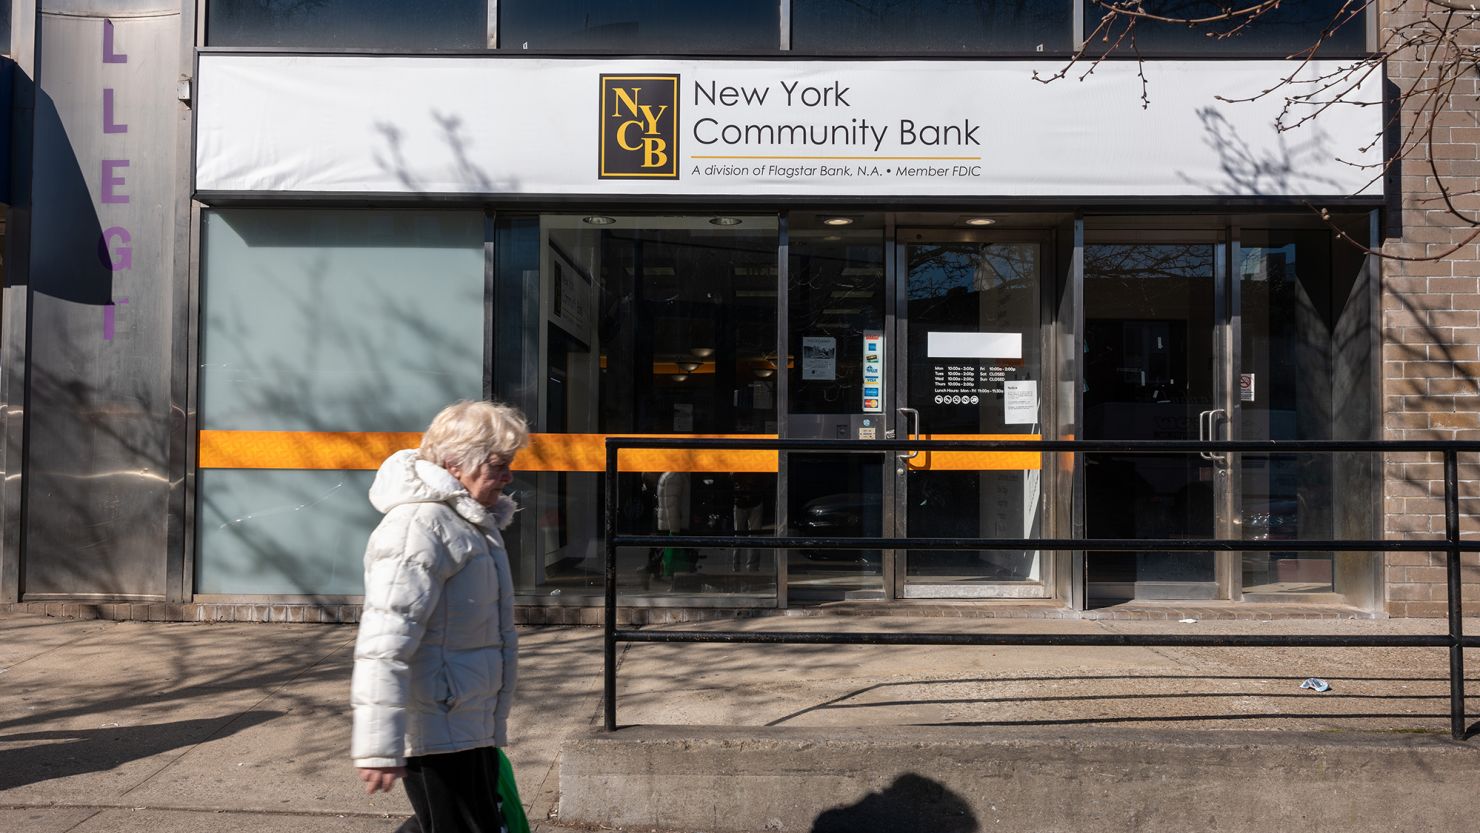 New York Community Bank's stock price stabilized after a wild week. But it isn't out of the woods.